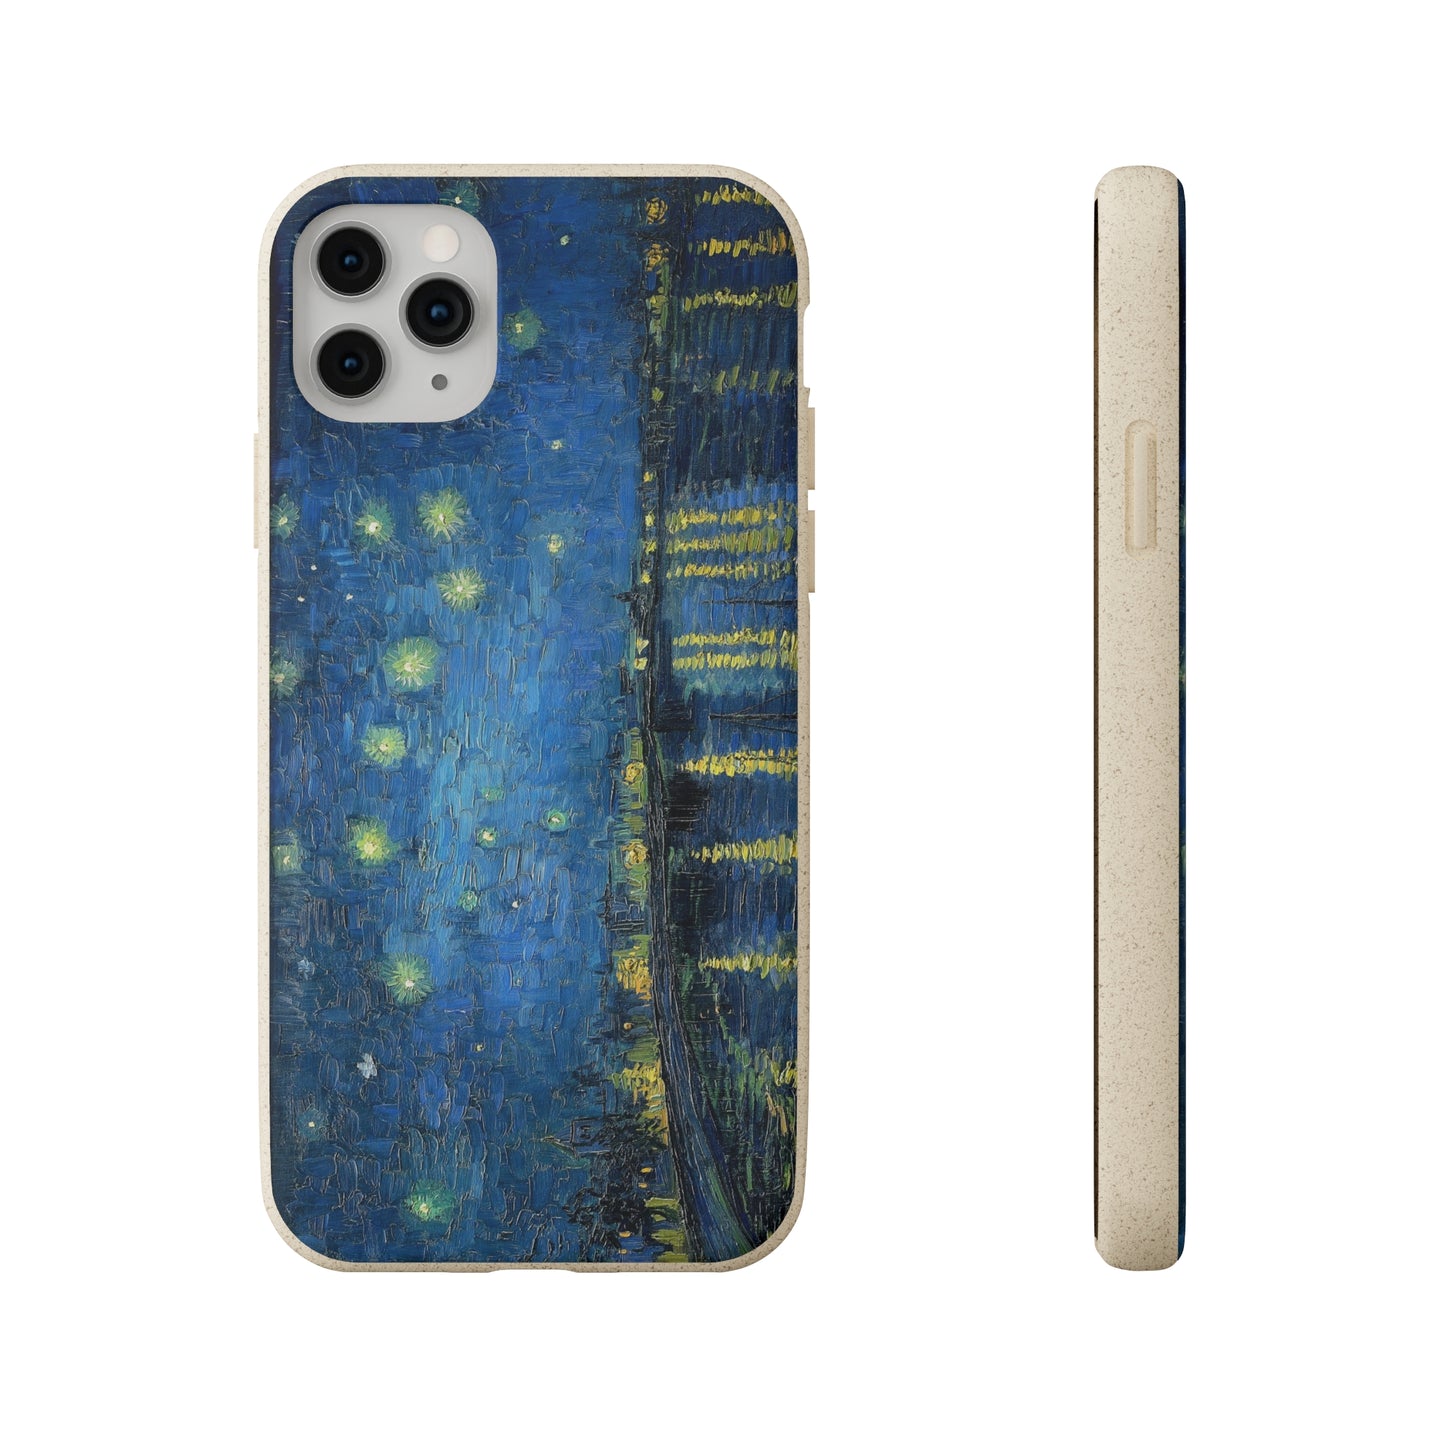 Van Gogh's "Starry Night Over the Rhone" Biodegradable Cases for iPhone and Samsung Galaxy